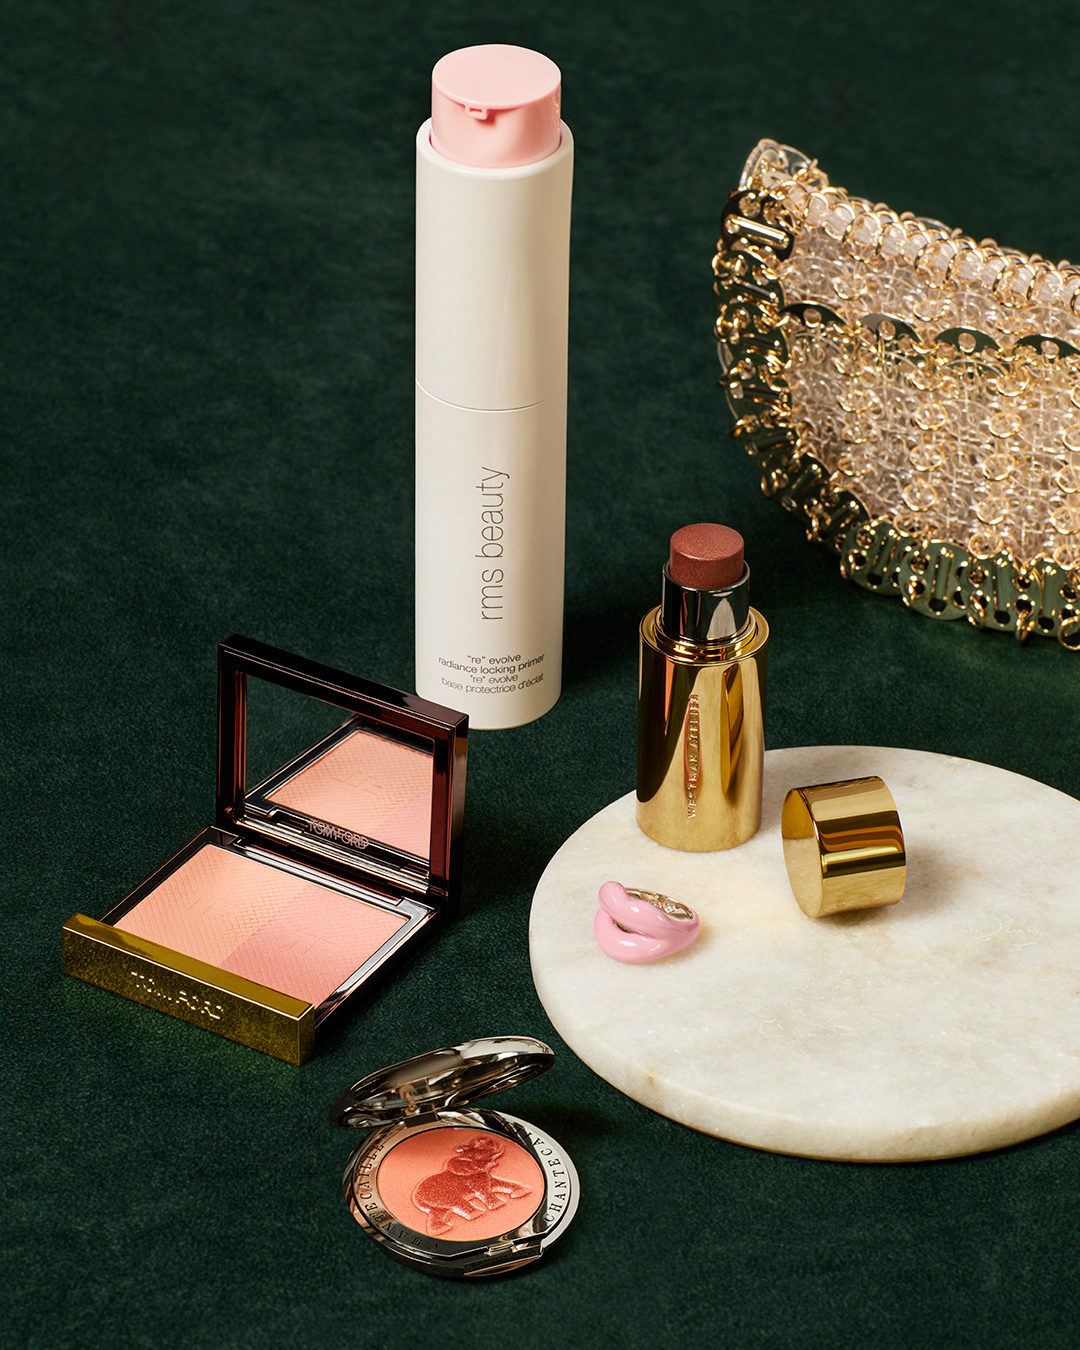 7 Truly Fabulous Beauty Stocking Stuffers  under 25 for the Girl on Your Christmas List ...